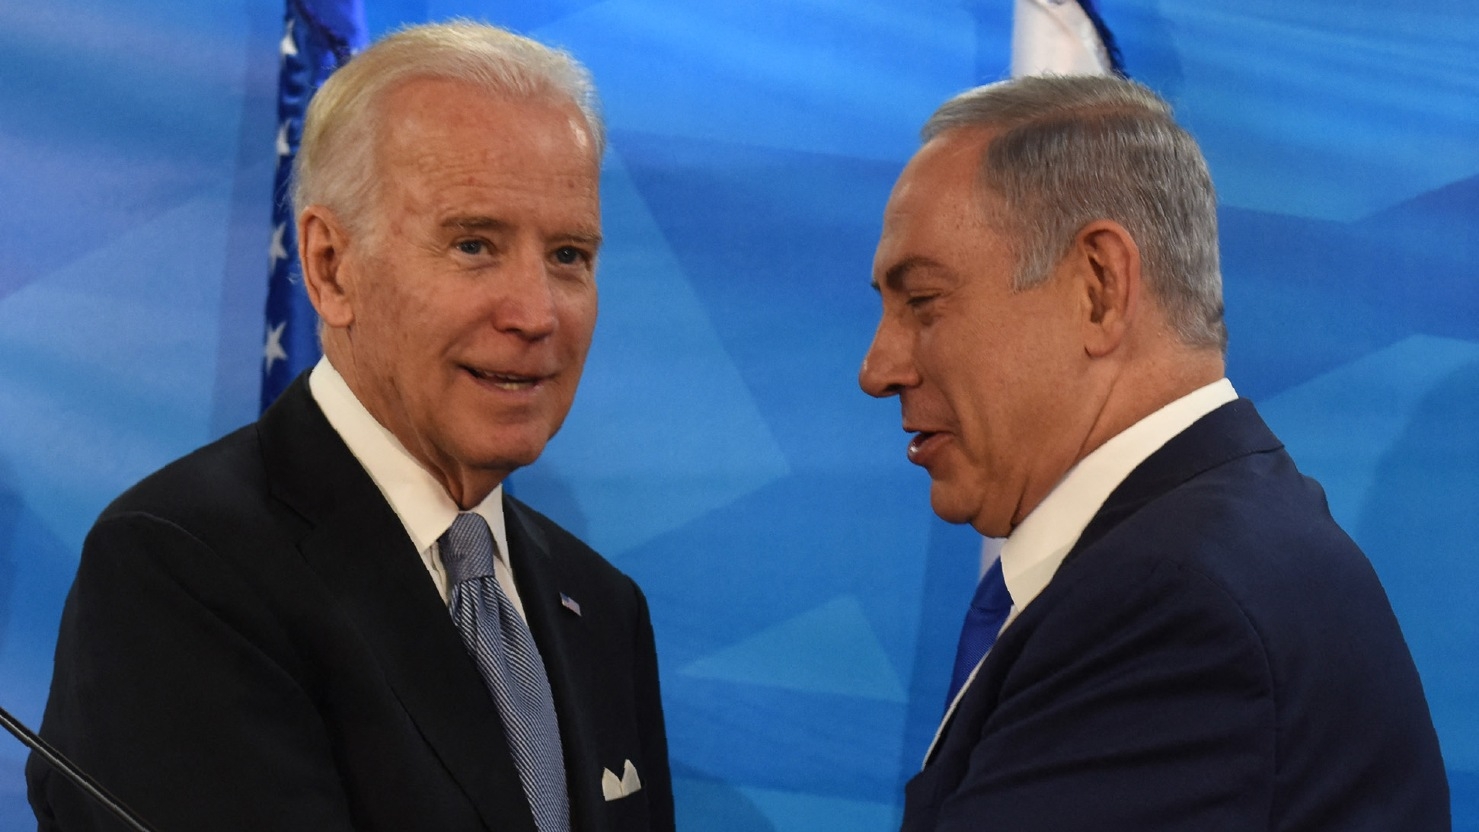 Then-US Vice President Joe Biden and Israeli Prime Minister Benjamin Netanyahu shake hands after giving joint statements in the prime minister's office on 9 March 2016.